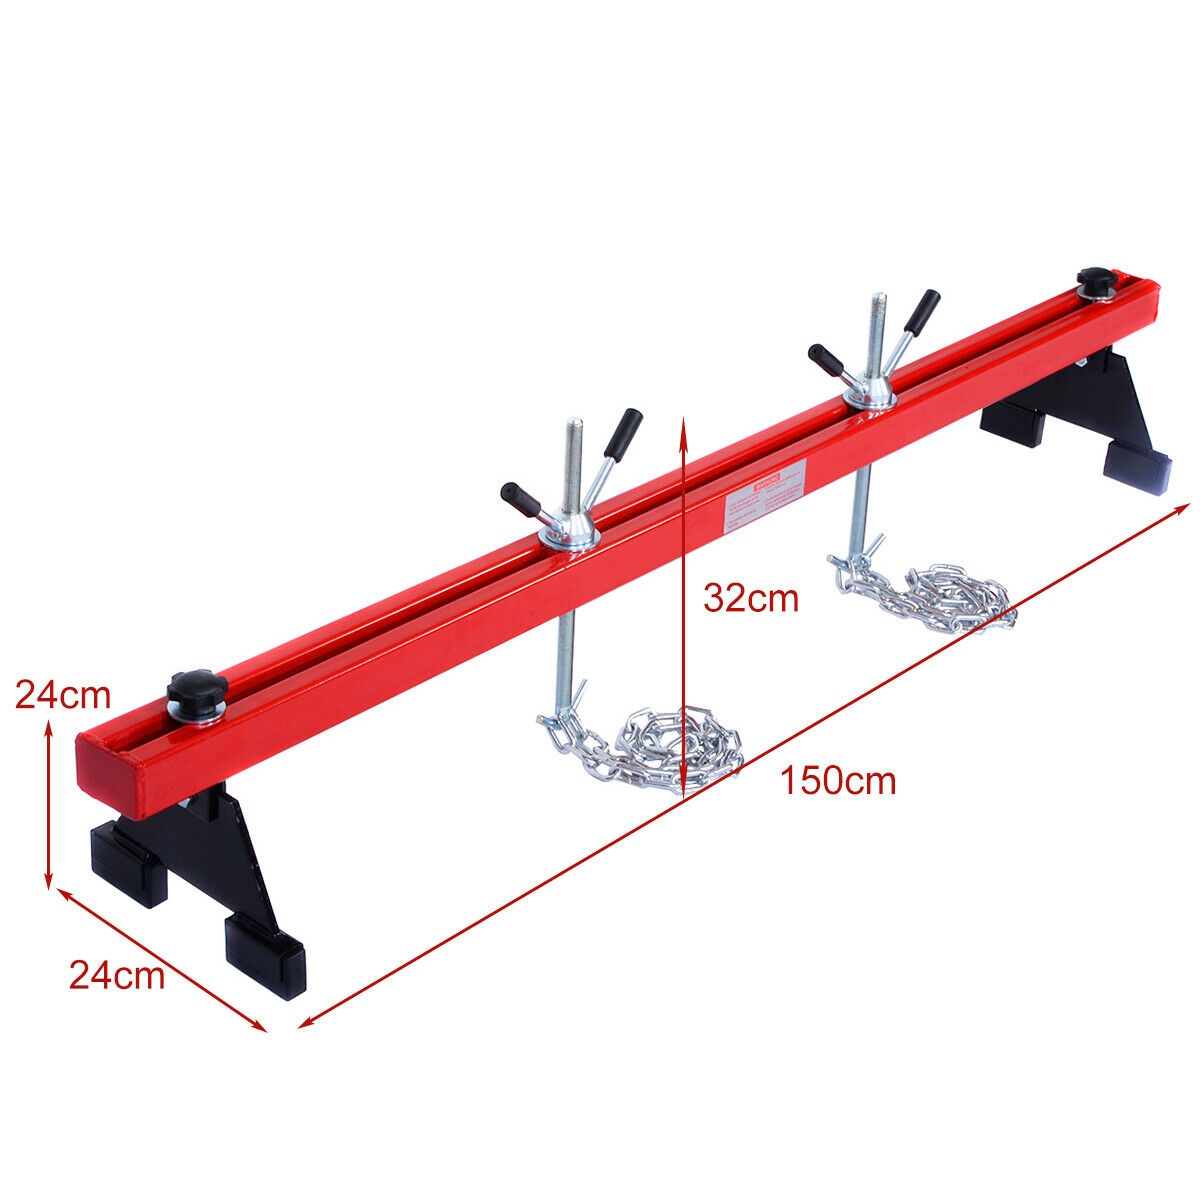 500kg Double Support Traverse Lifter with Gearbox Bar